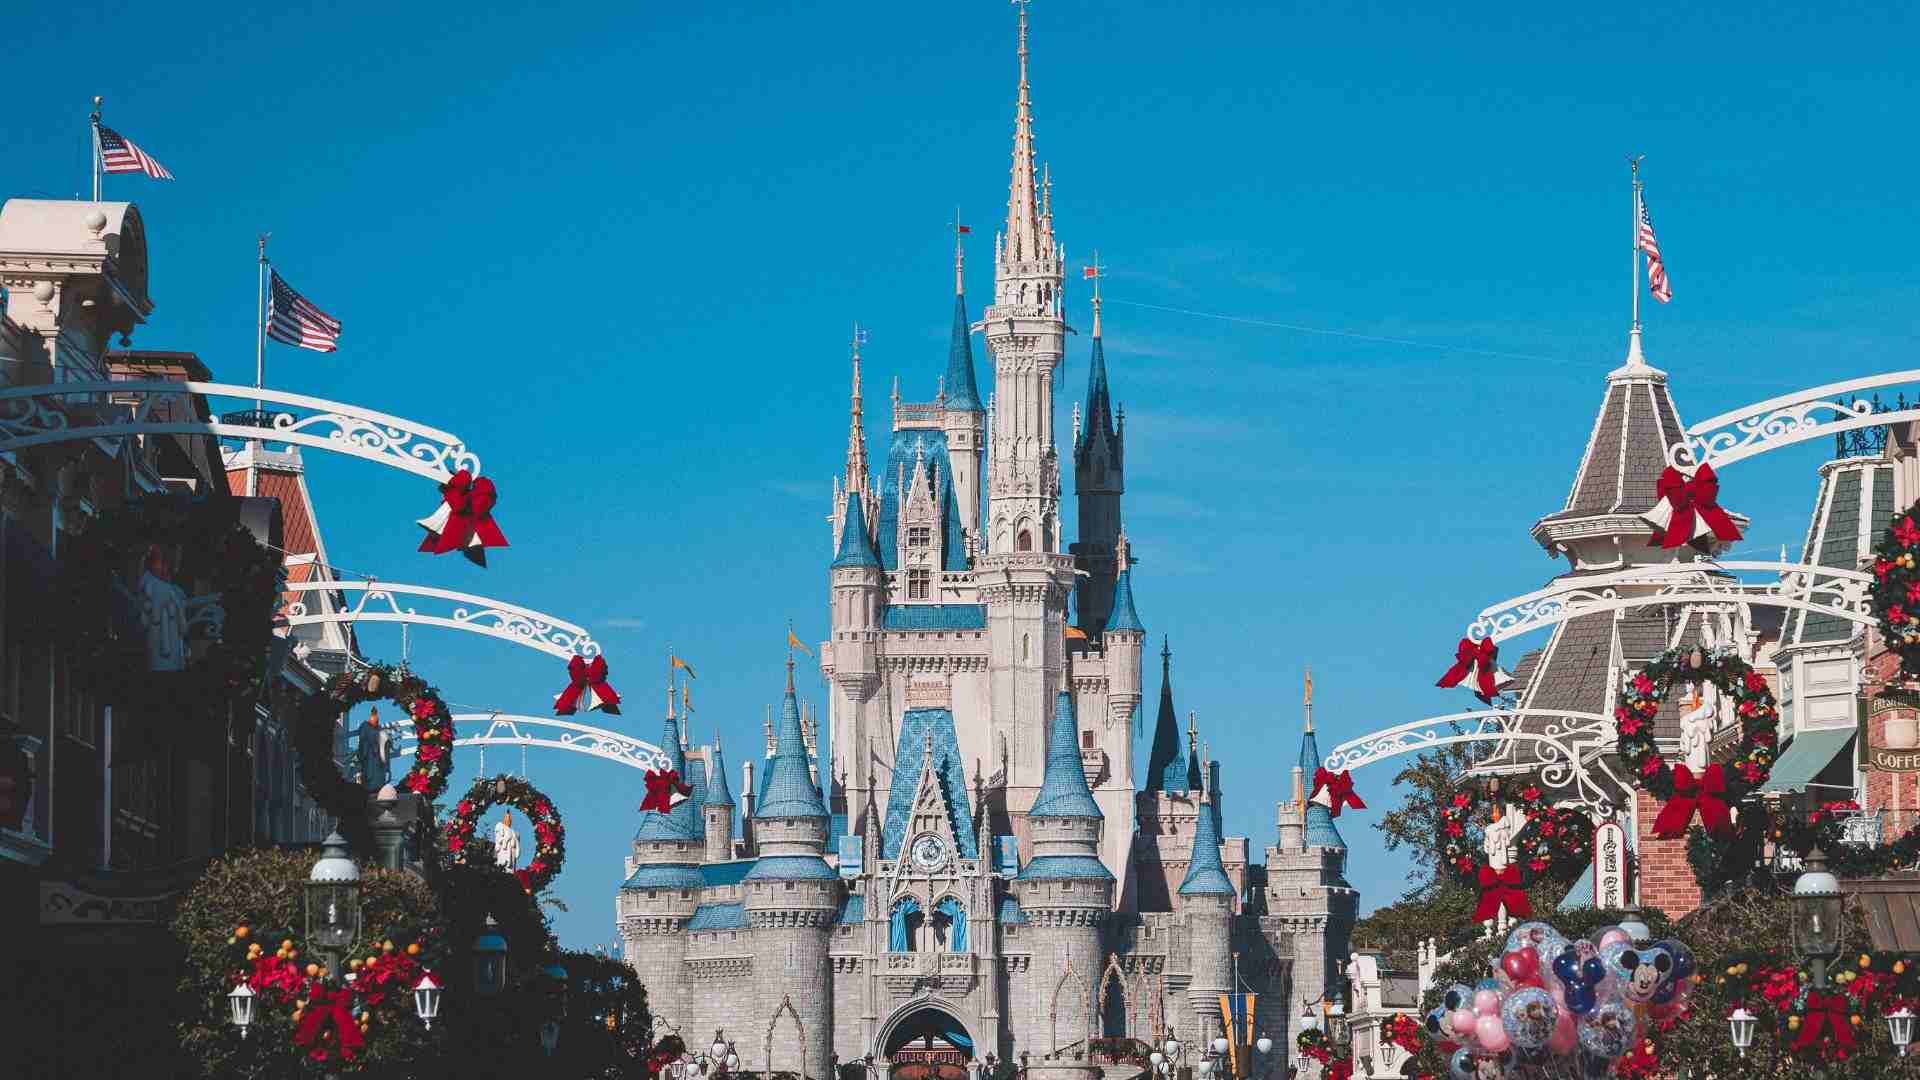 How Many Disney Parks Are There?